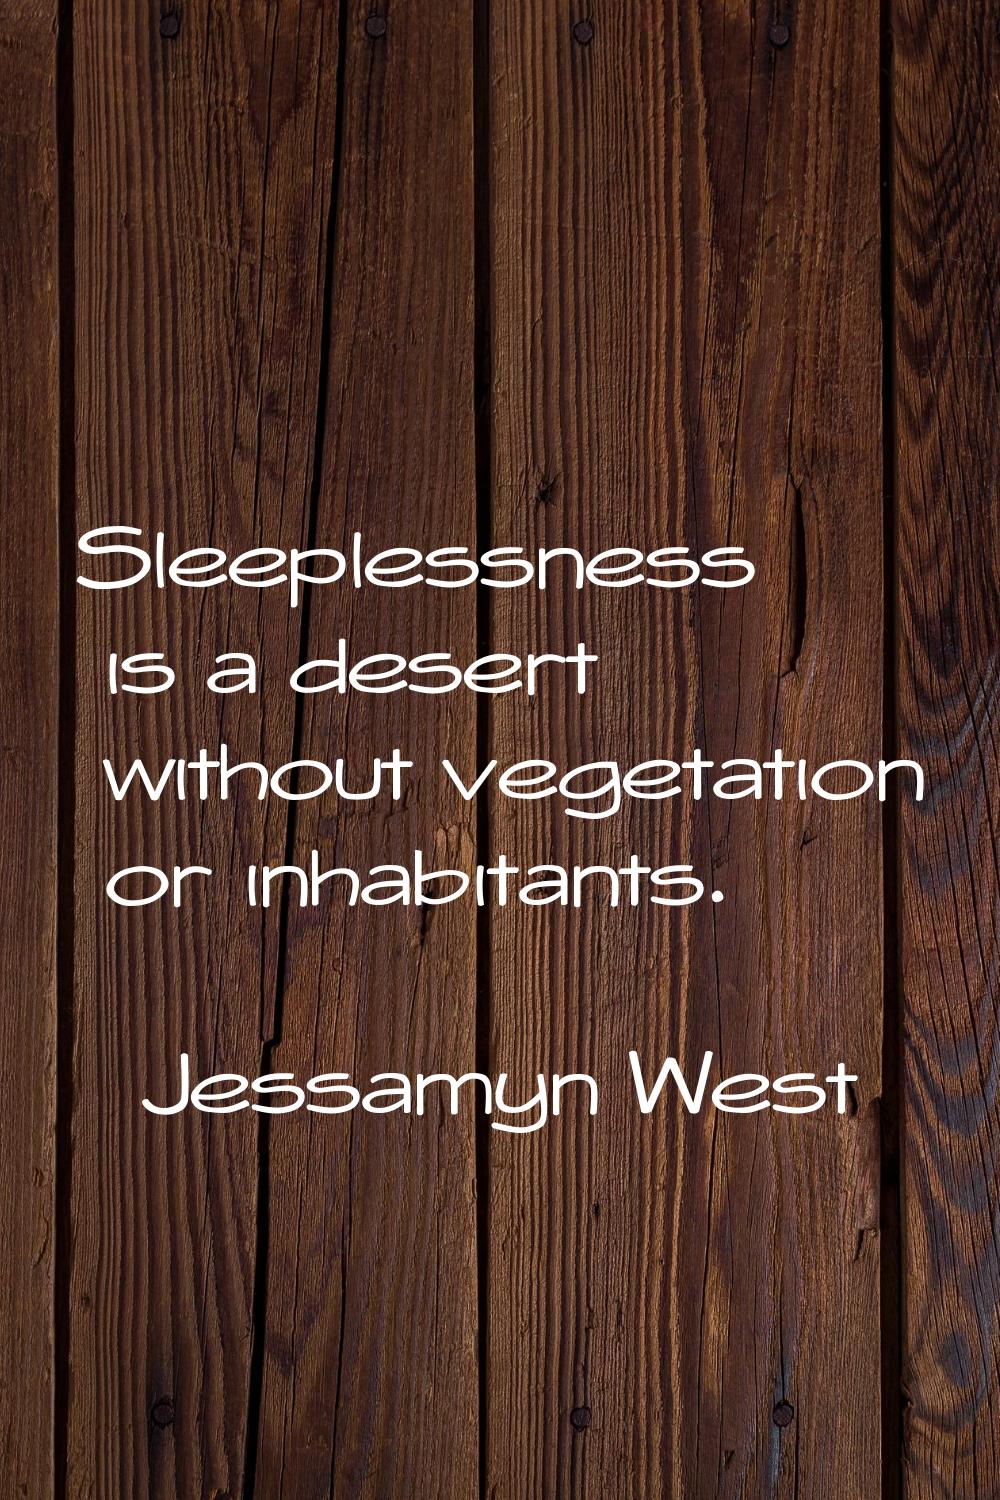 Sleeplessness is a desert without vegetation or inhabitants.